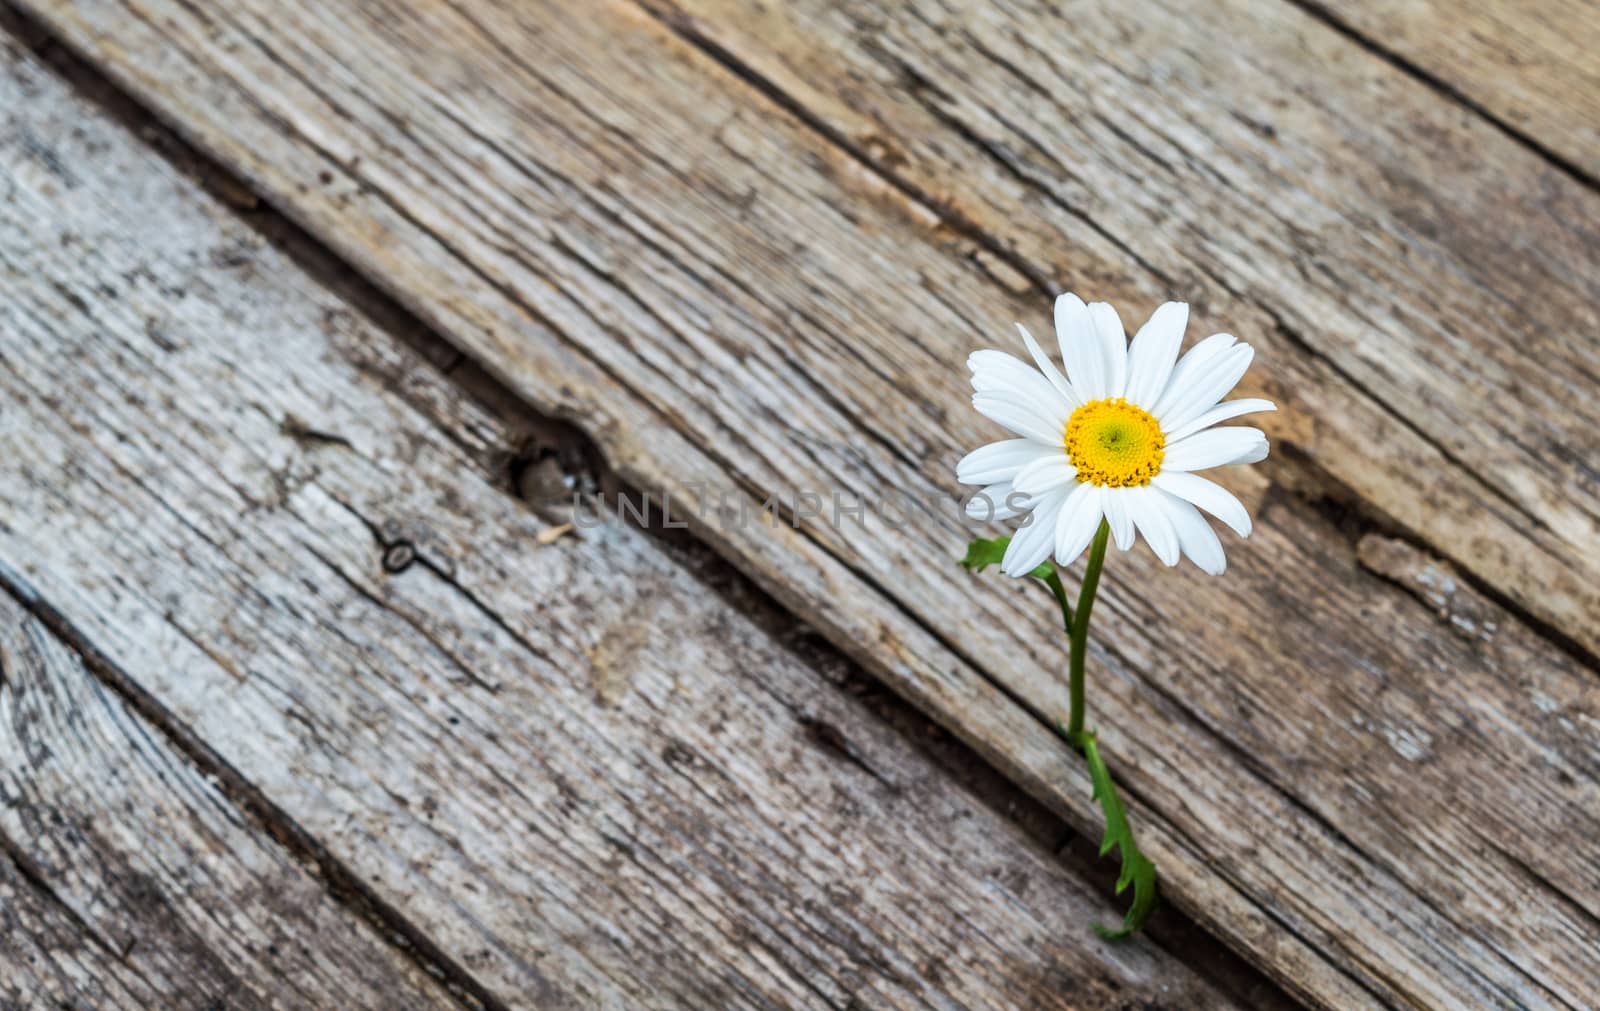 Daisy flower standing alone on wooden background  by radzonimo